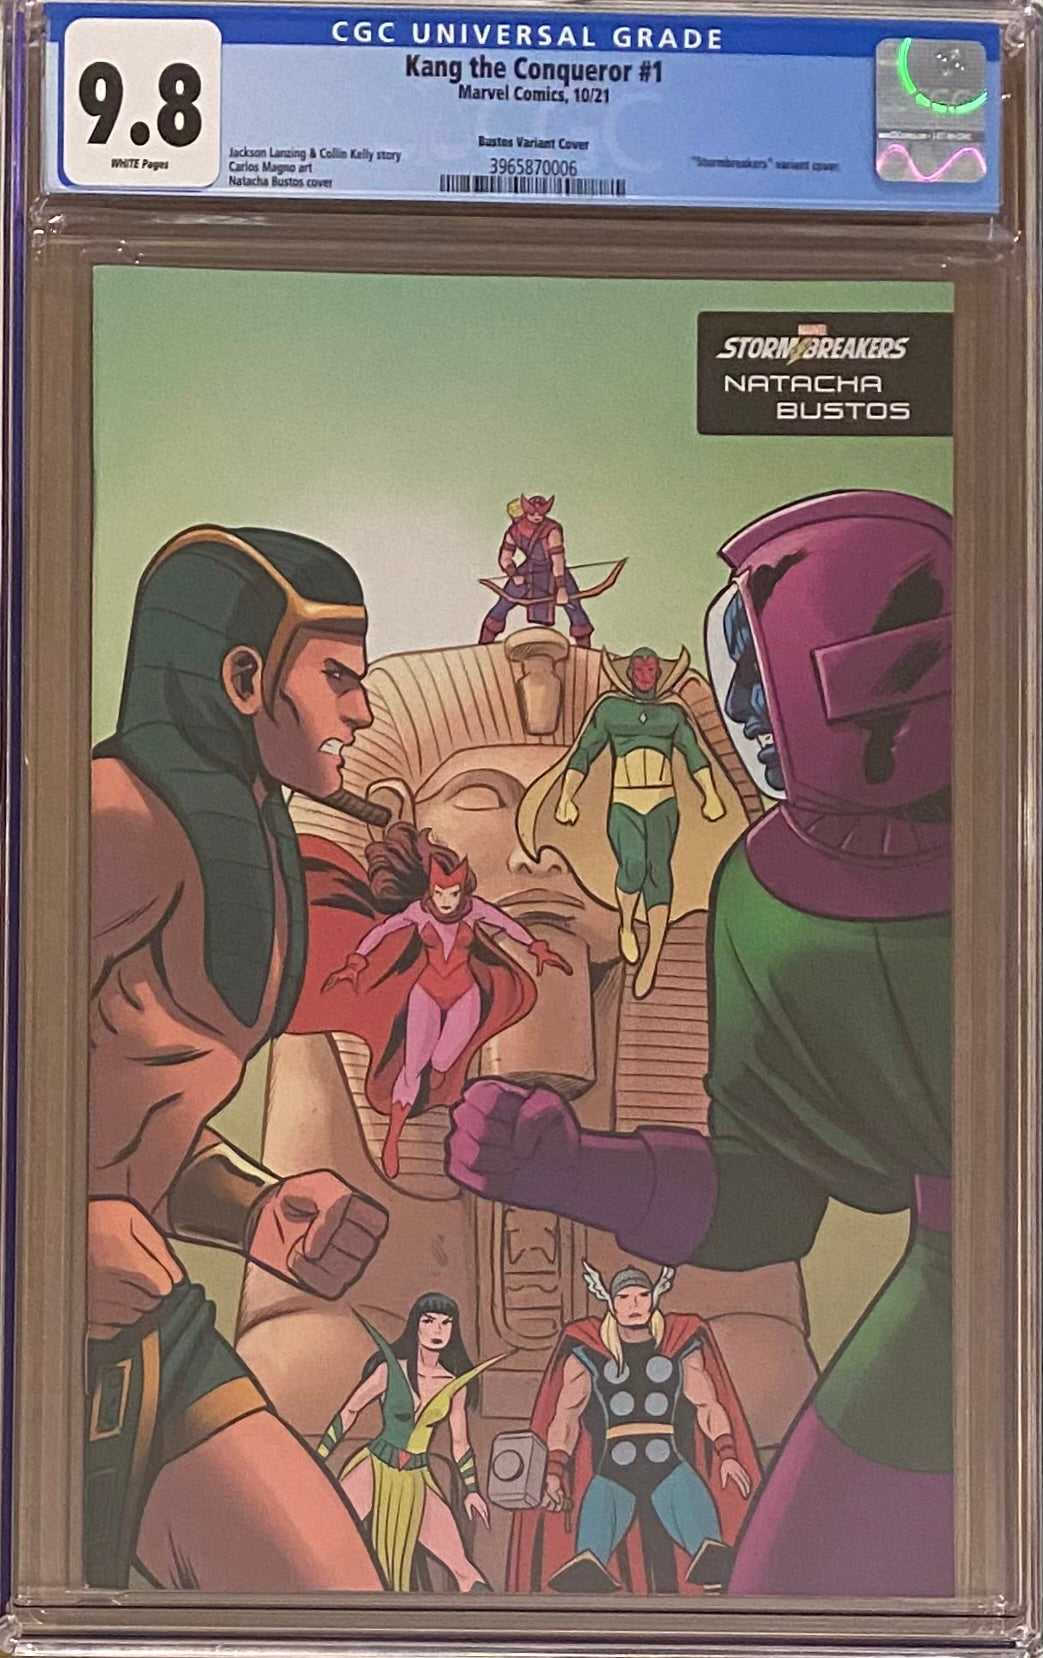 Kang the Conqueror #1 Bustos "Stormbreakers" Variant CGC 9.8